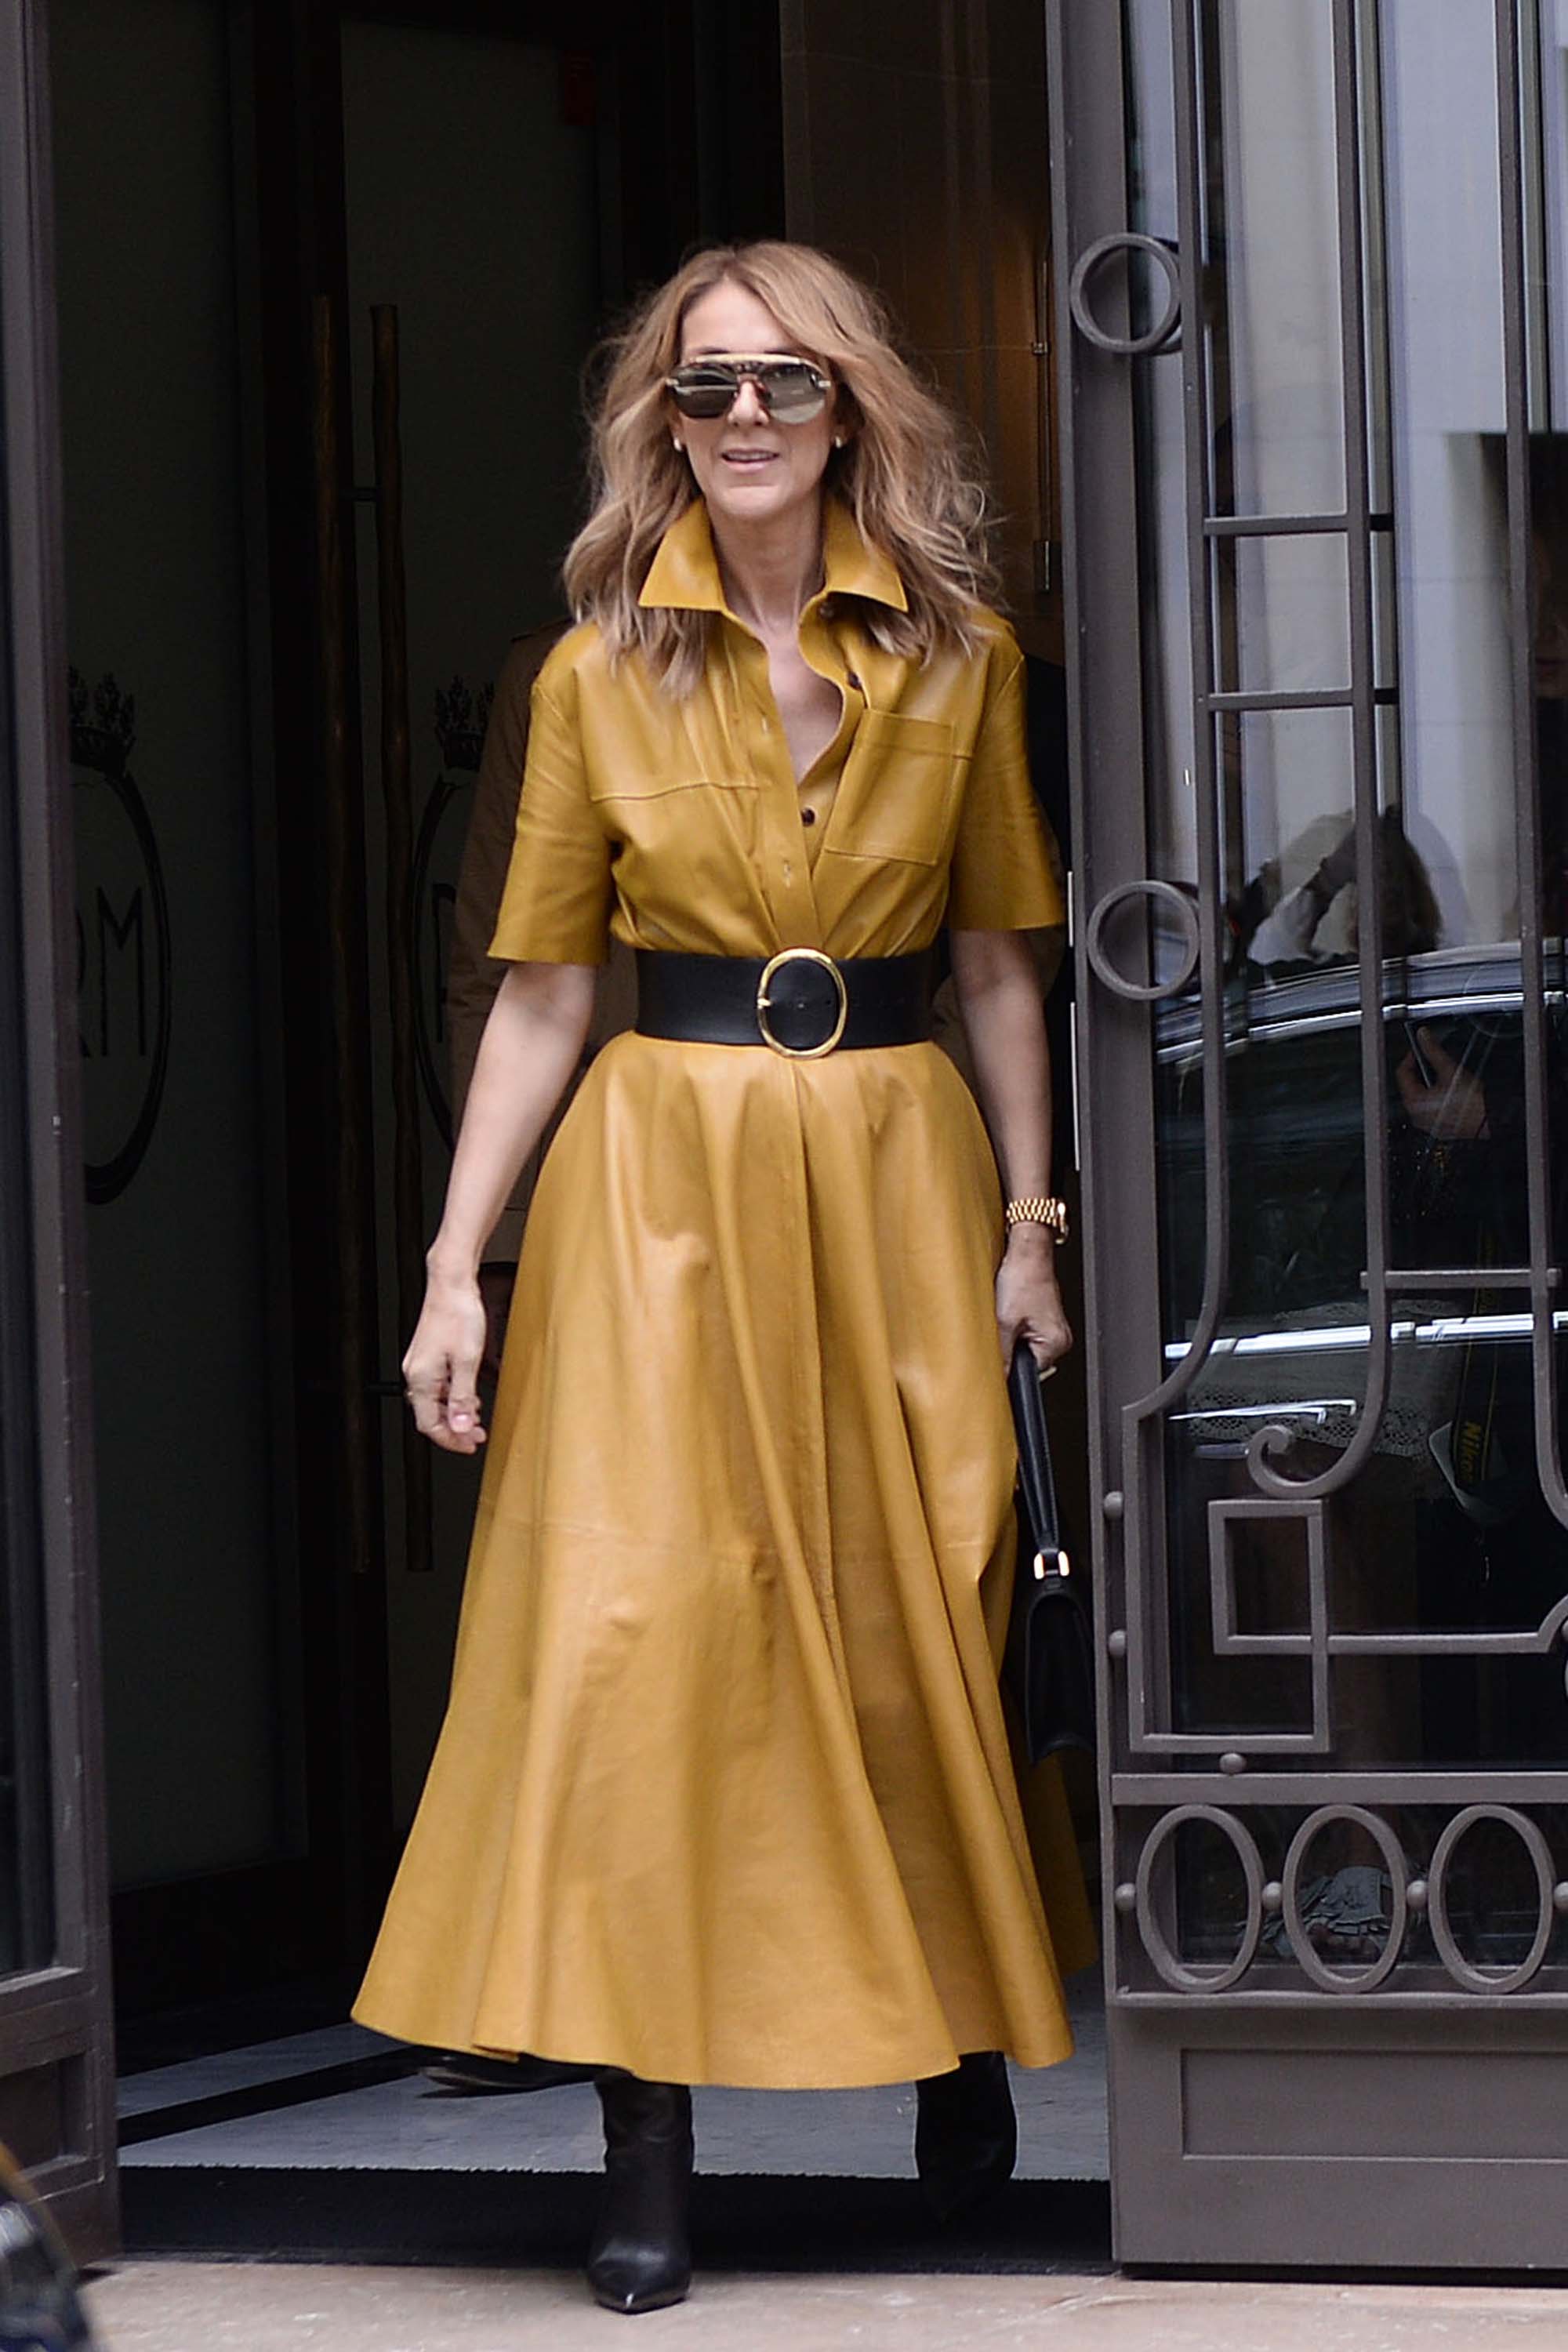 Celine Dion attends Christian Dior show